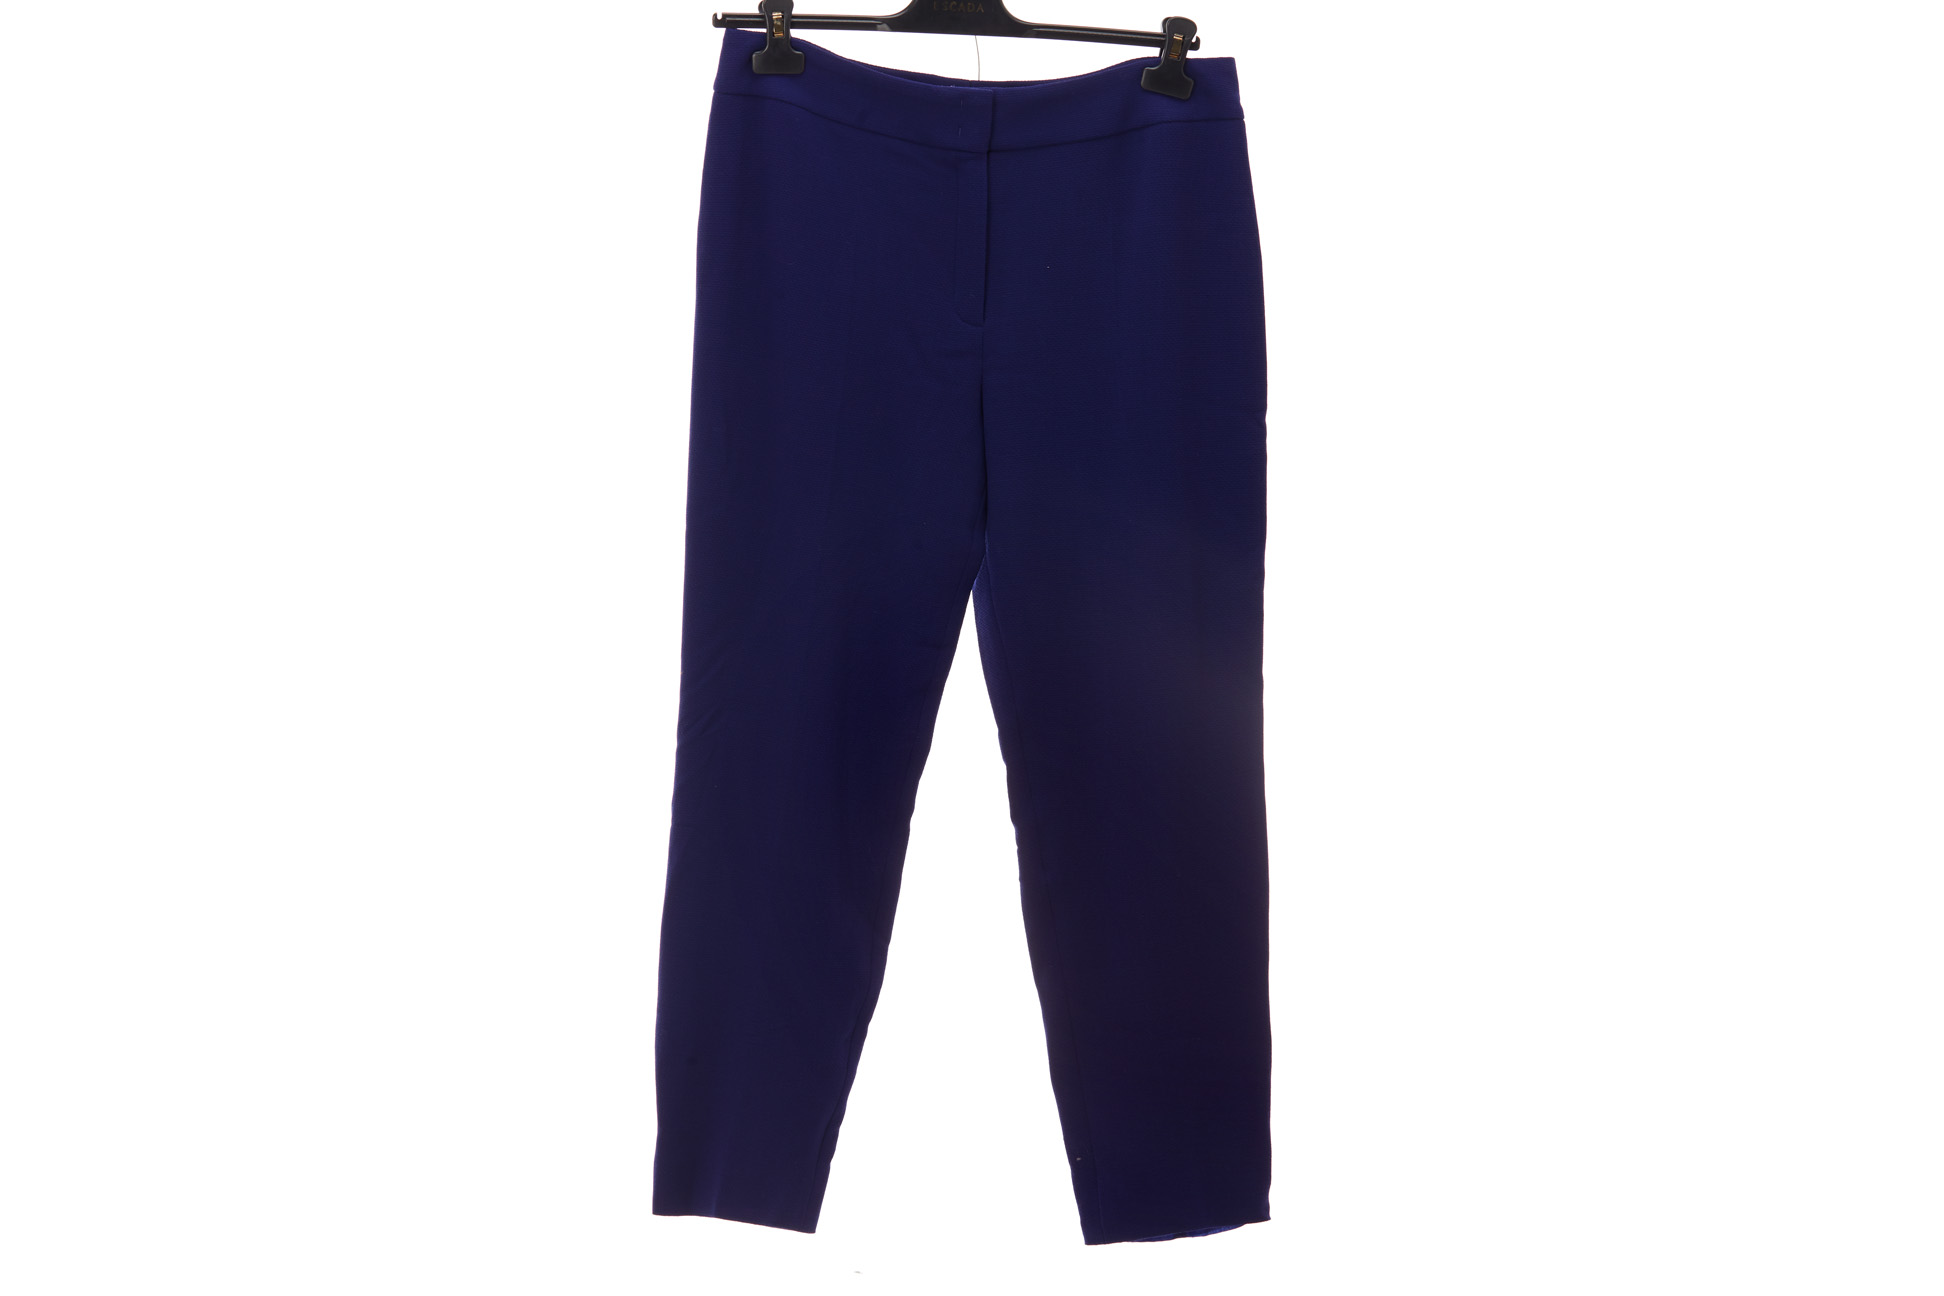 A PAIR OF ESCADA 'TINA INK' WOOL TROUSERS